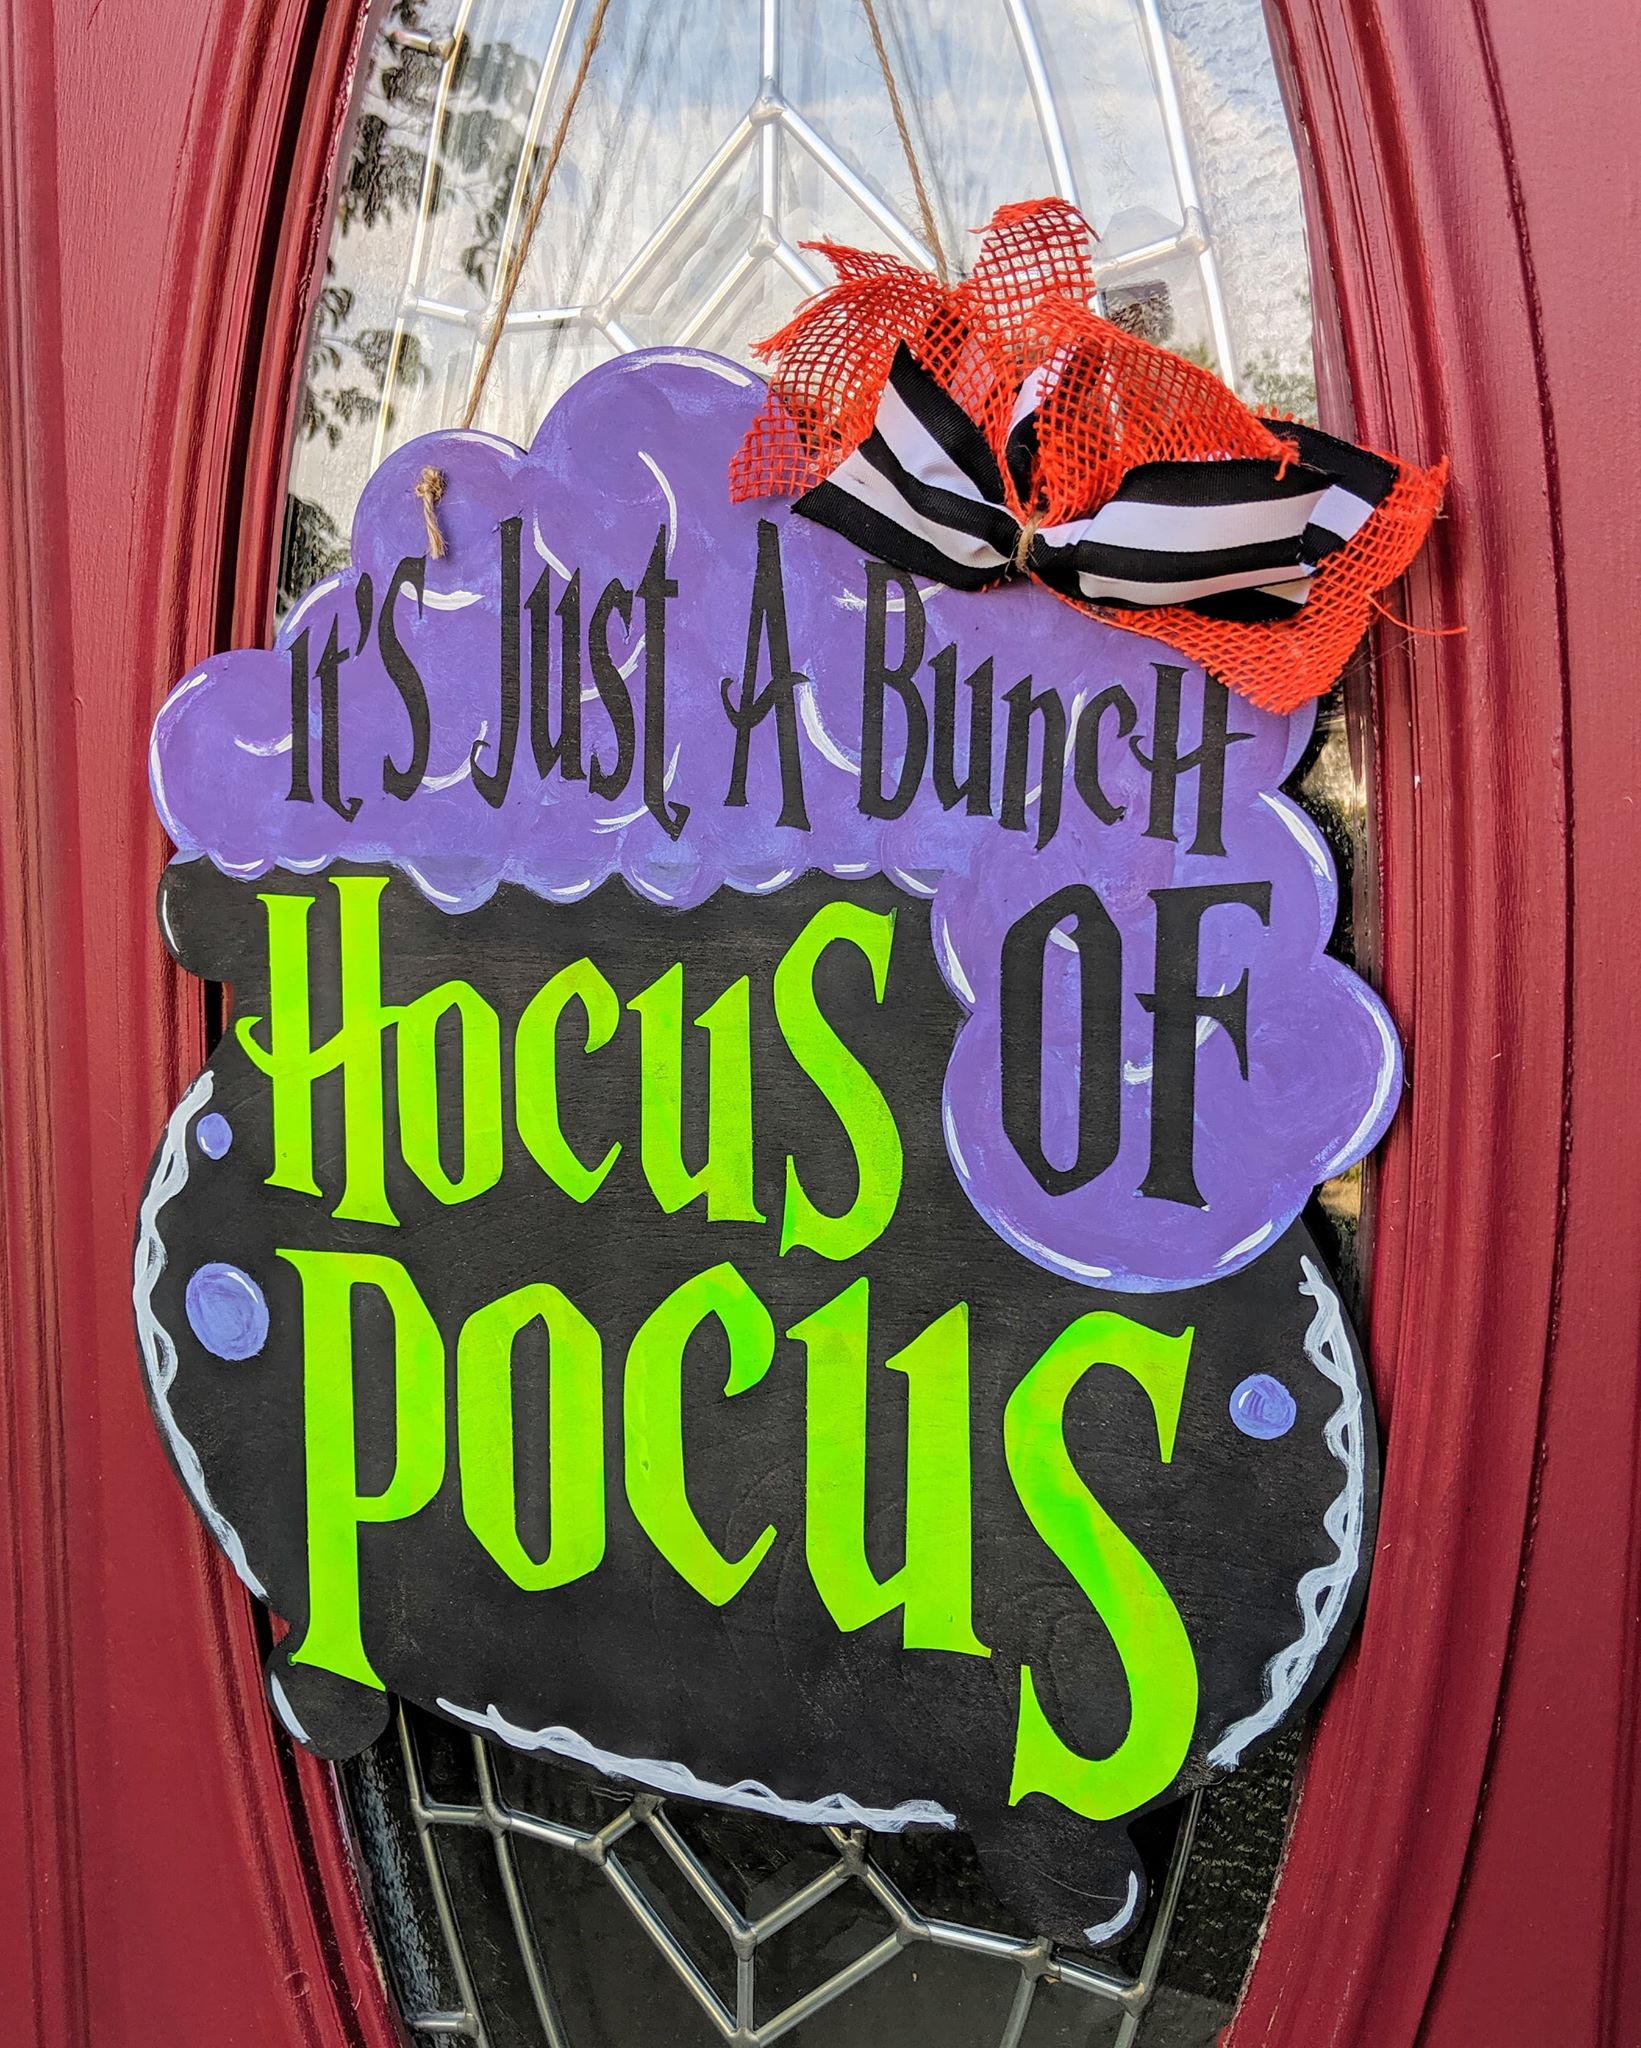 Door hanger Witches Cauldron - It's all just a bunch of H. Pocus